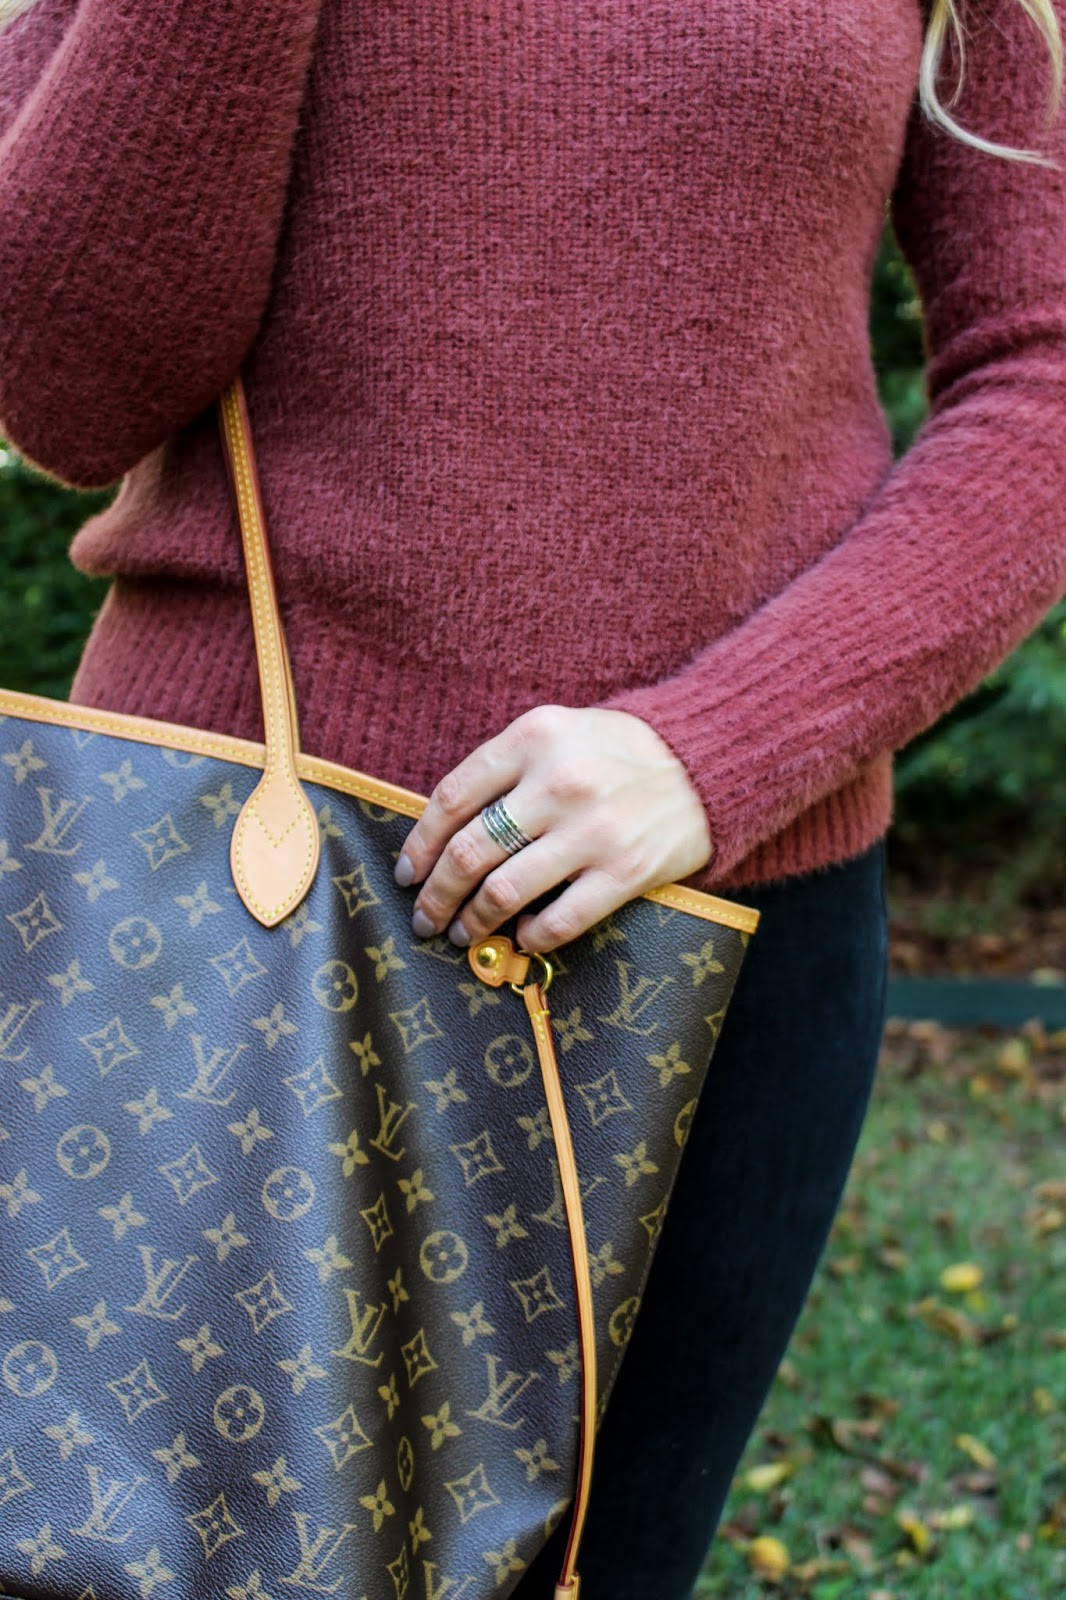 Black Friday Sales Roundup + LOUIS VUITTON NEVERFULL GIVEAWAY